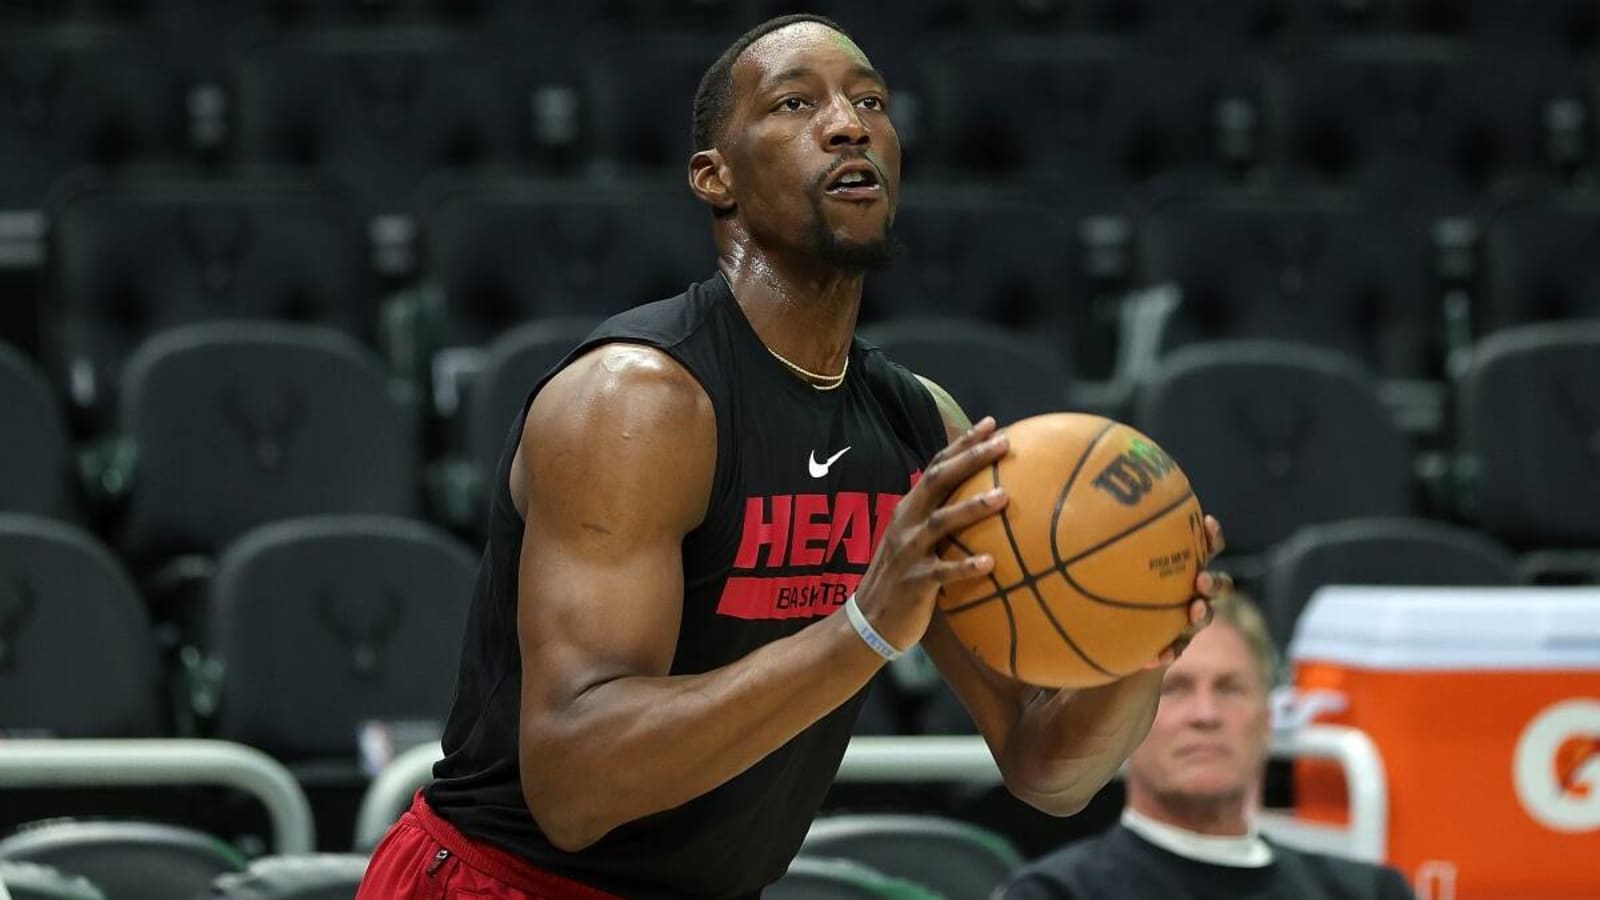 Bam Adebayo halts press conference to answer phone call from mom